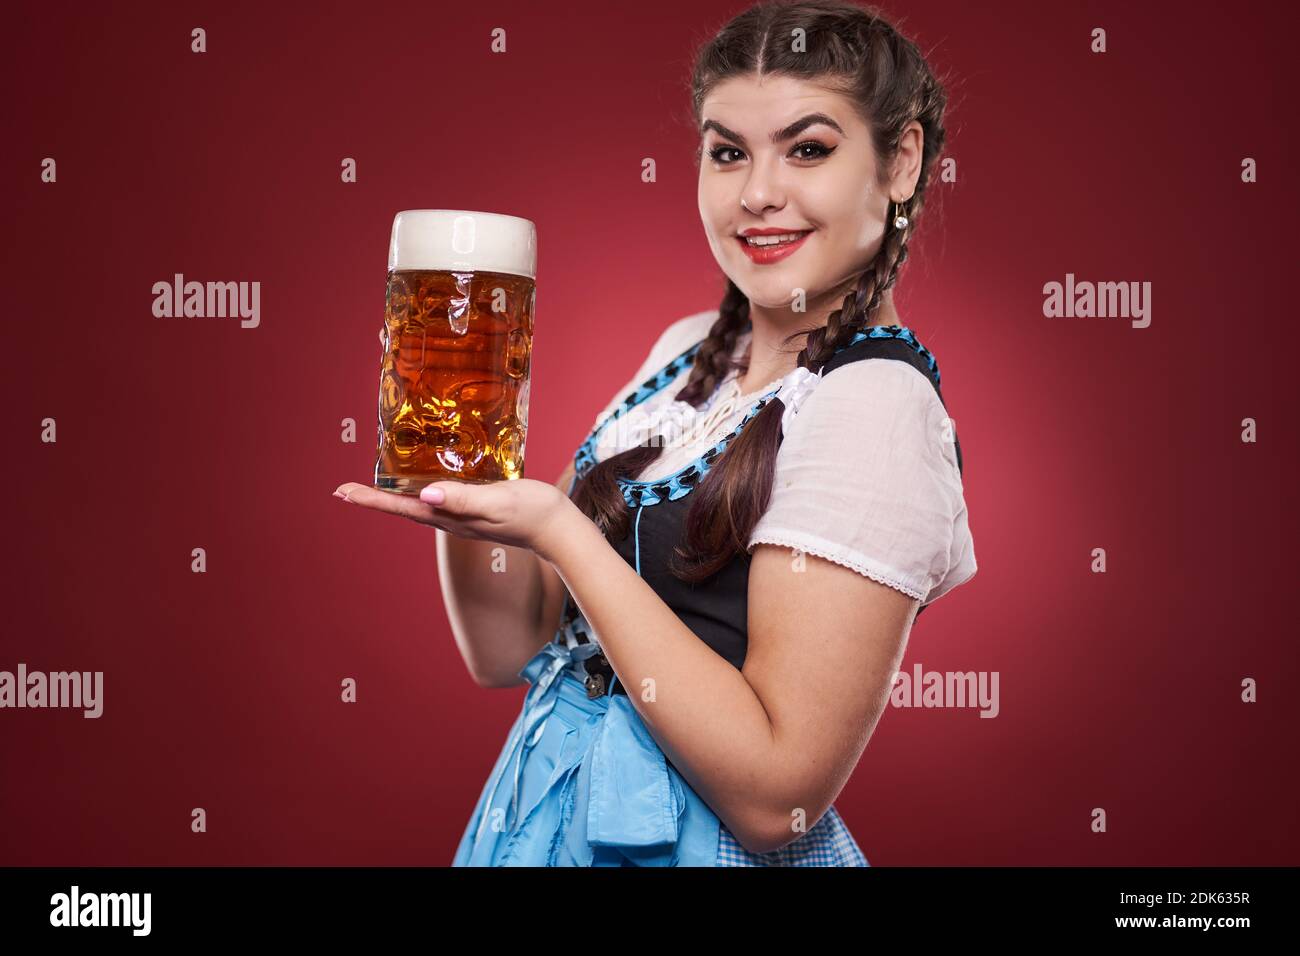 https://c8.alamy.com/comp/2DK635R/young-woman-in-traditional-german-costume-holding-a-pint-of-pale-lager-2DK635R.jpg